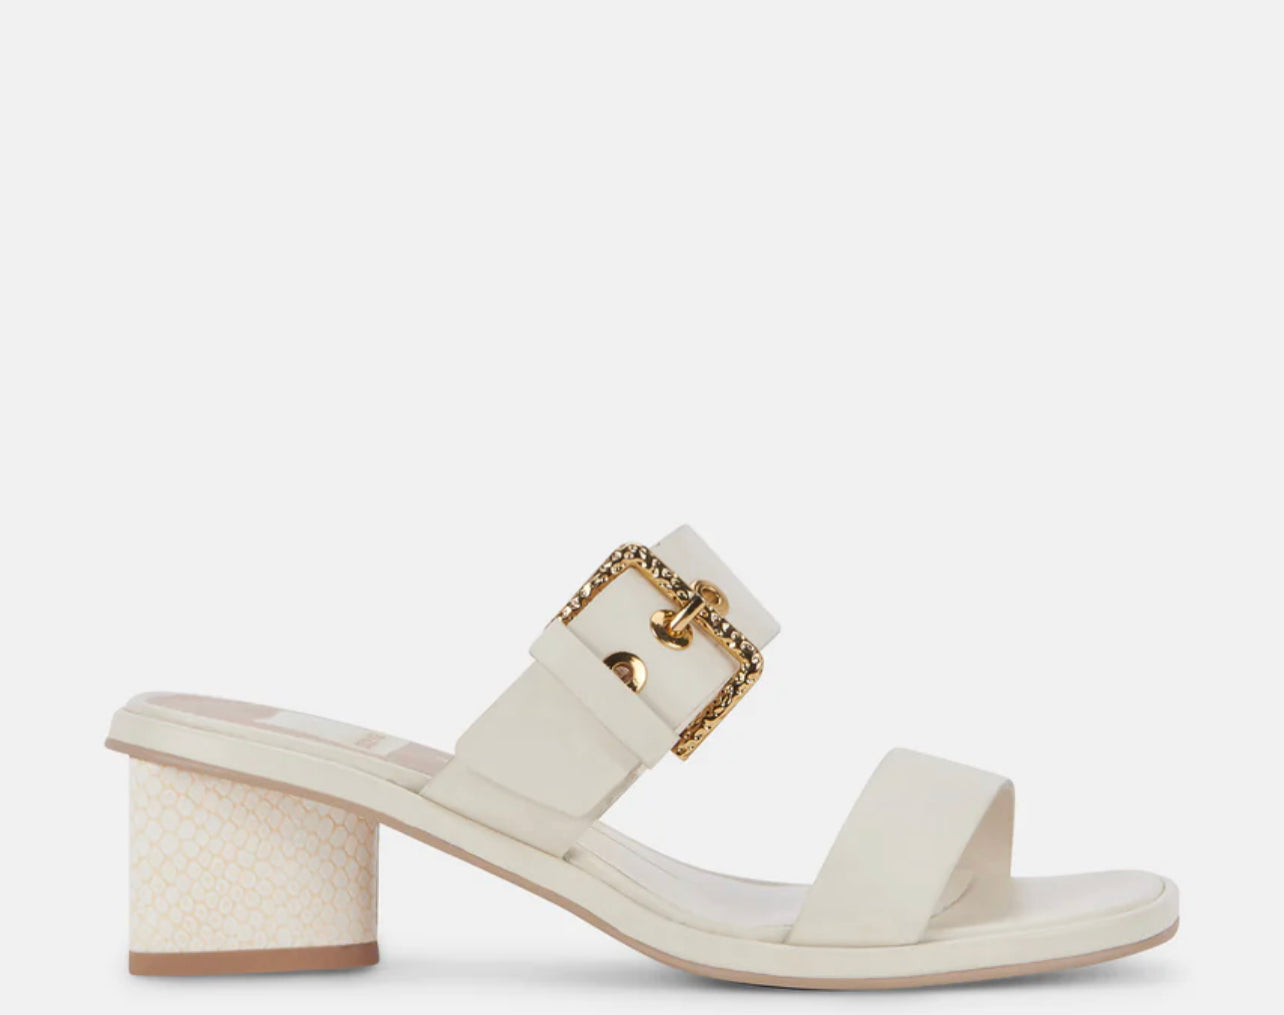 Riva Sandals By Dolce Vita